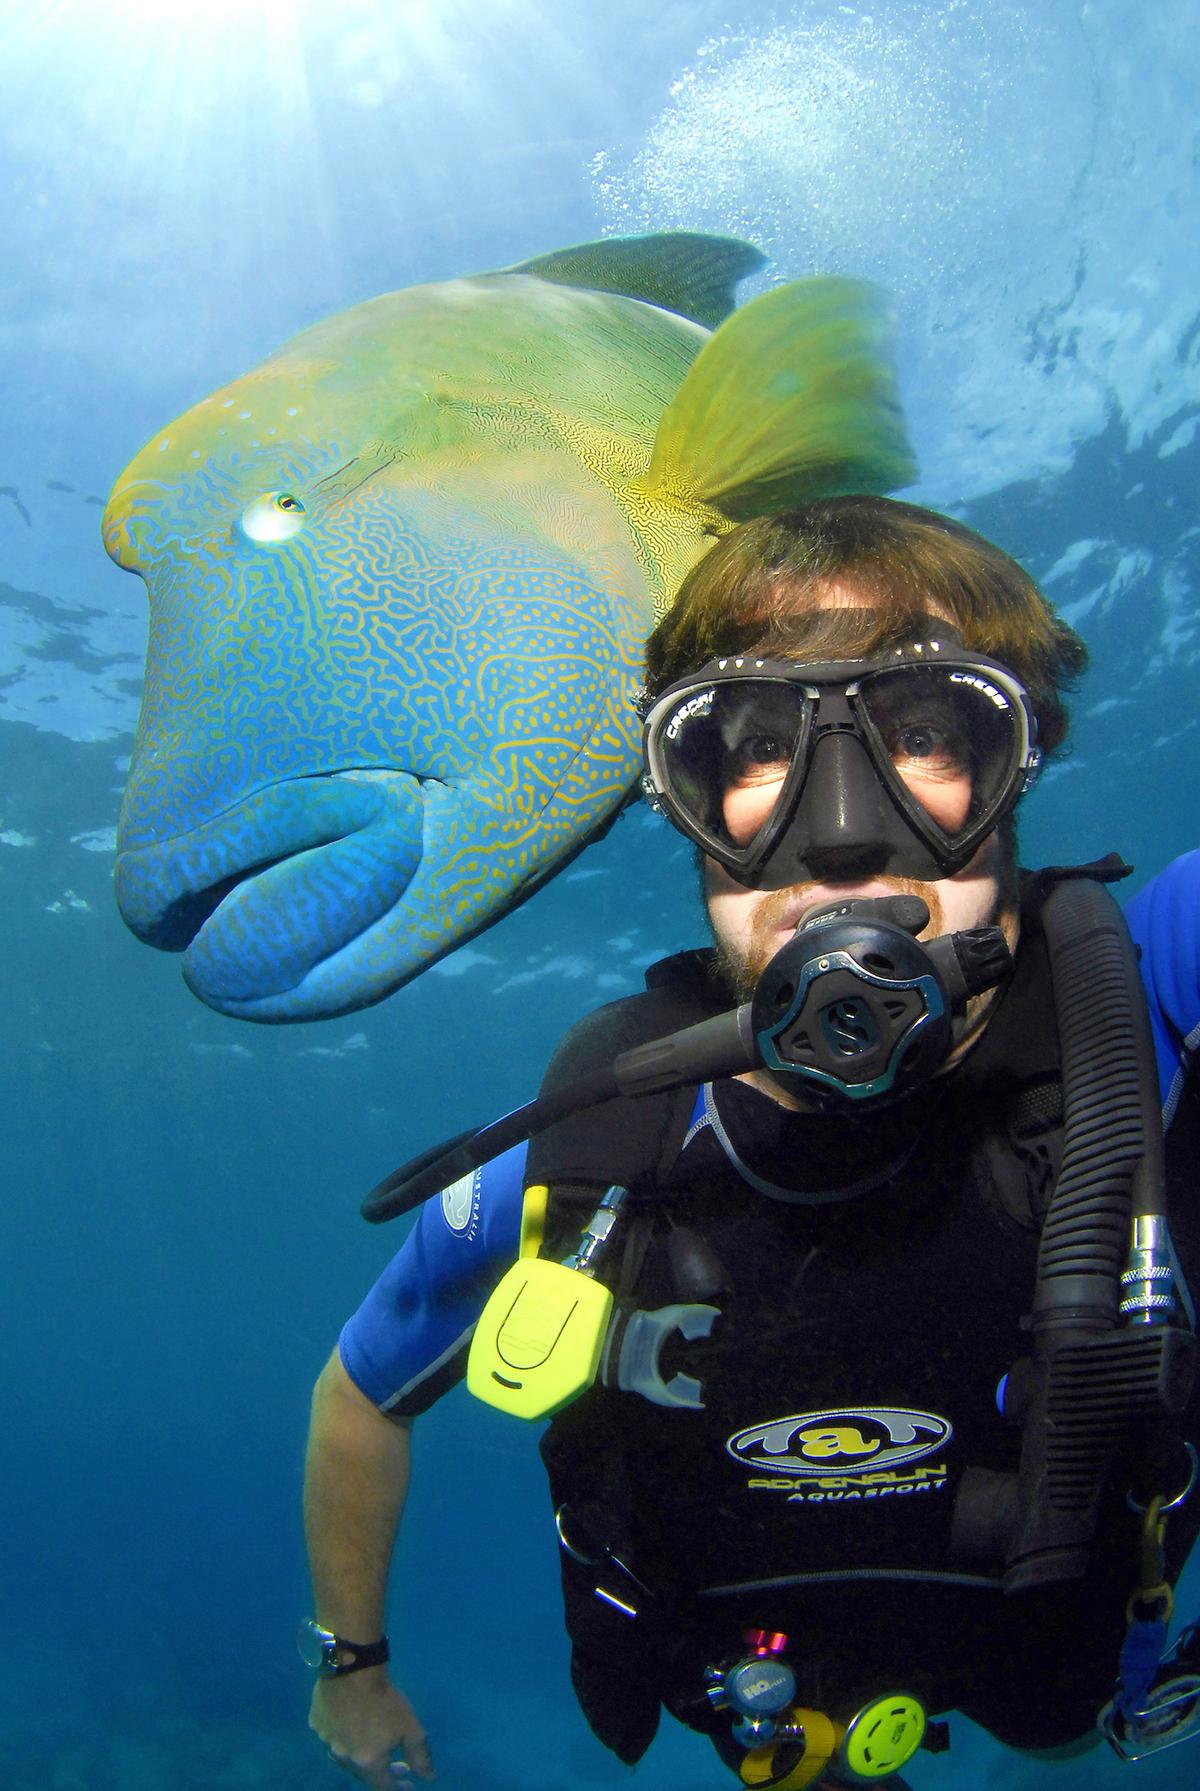 Photographer Gary Brennand takes a picture of himself with the Napoleon wrasse while diving near the coast of Bali, Indonesia. (Caters News)